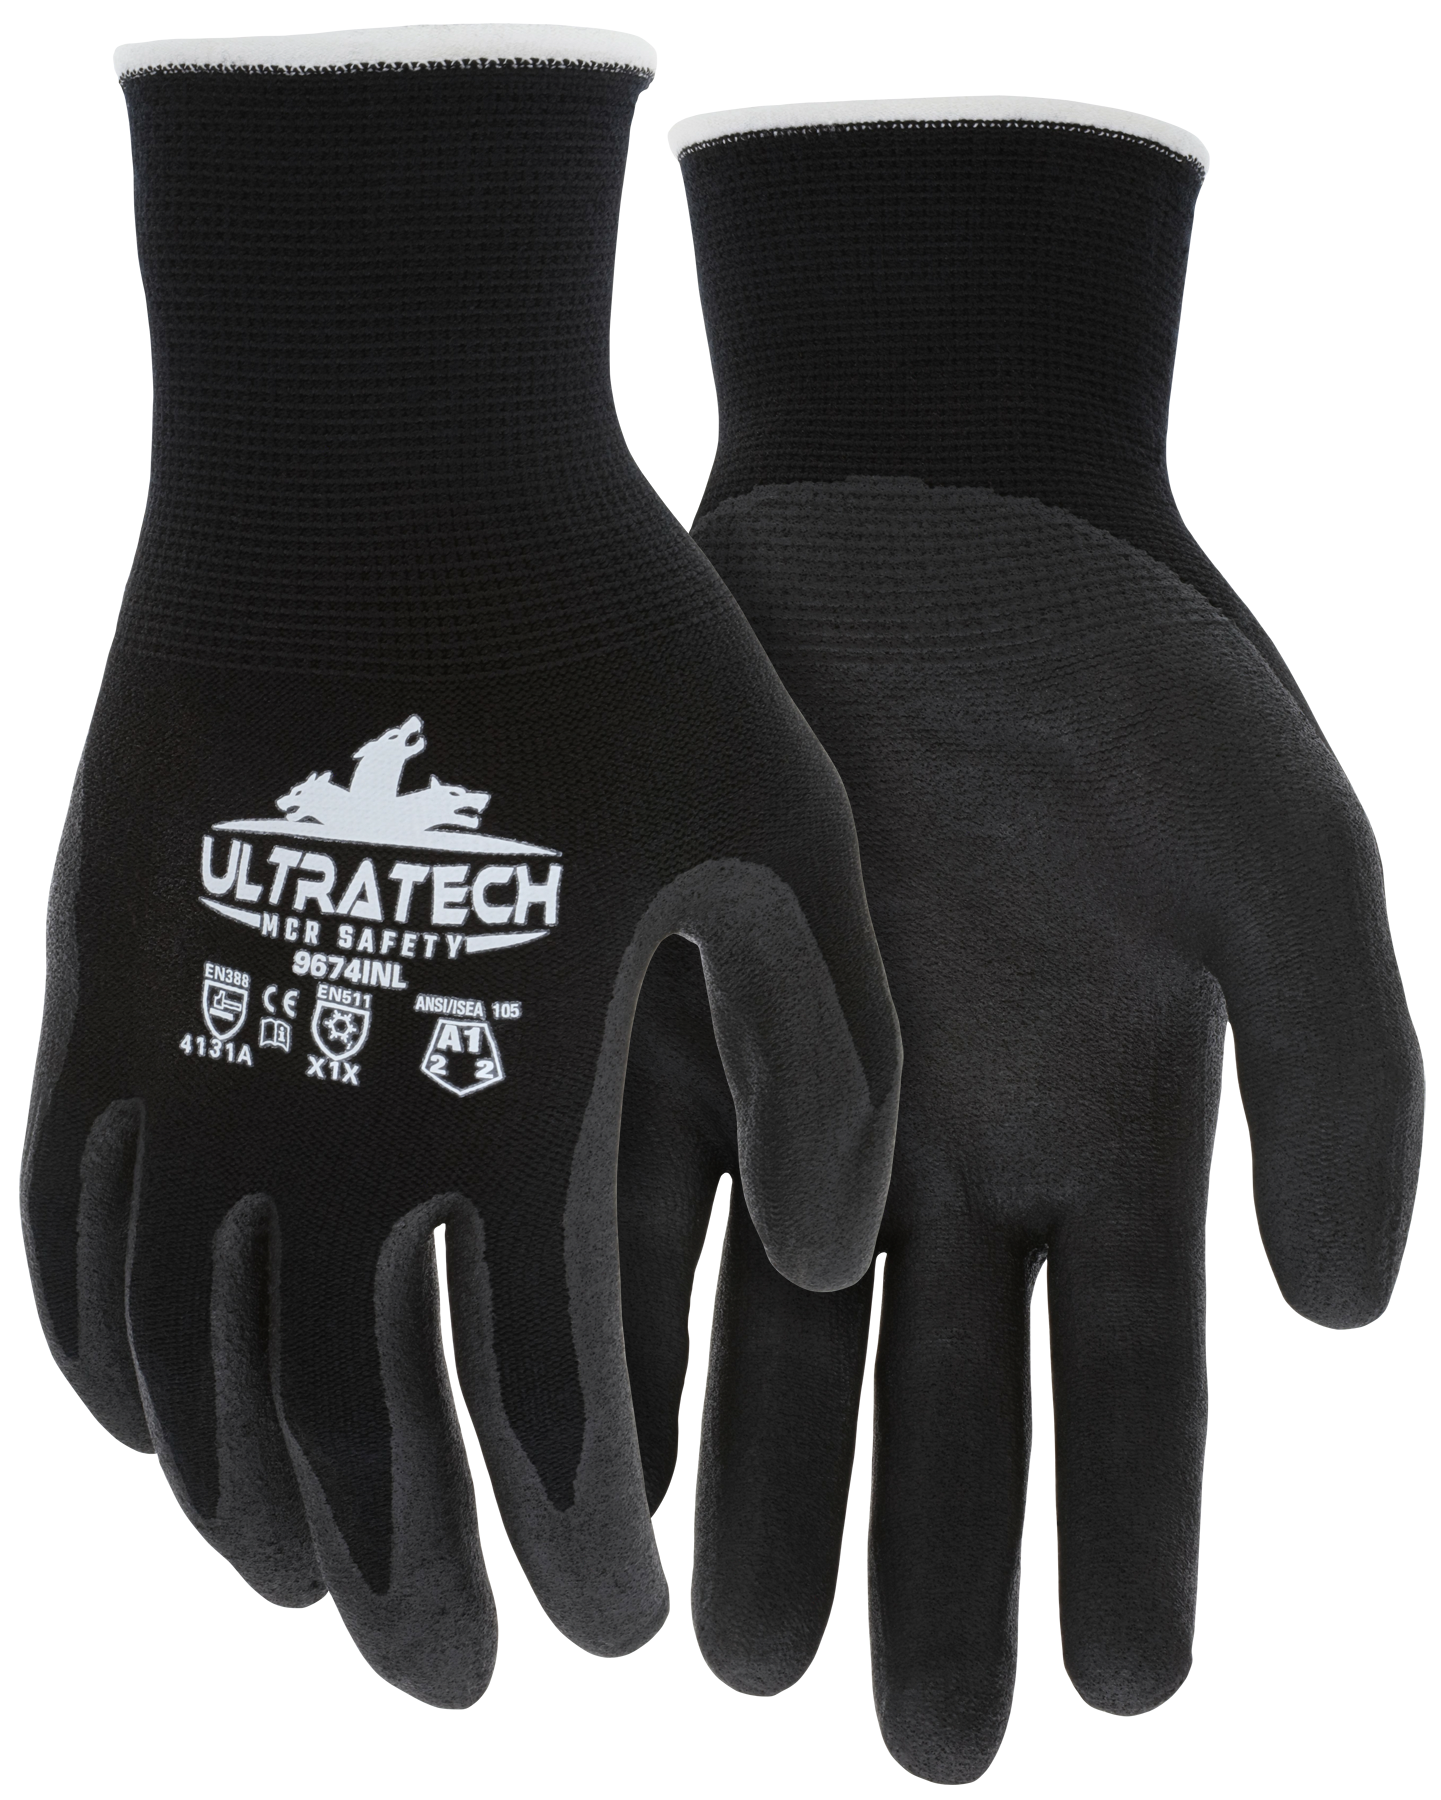 https://www.mcrsafety.com/~/media/mcrsafety/blog/2023-updates/grip-gloves/mcr-9674in-xhires.png?h=390.556&w=377.333&hash=8619888027CEE675A49F058791B42773